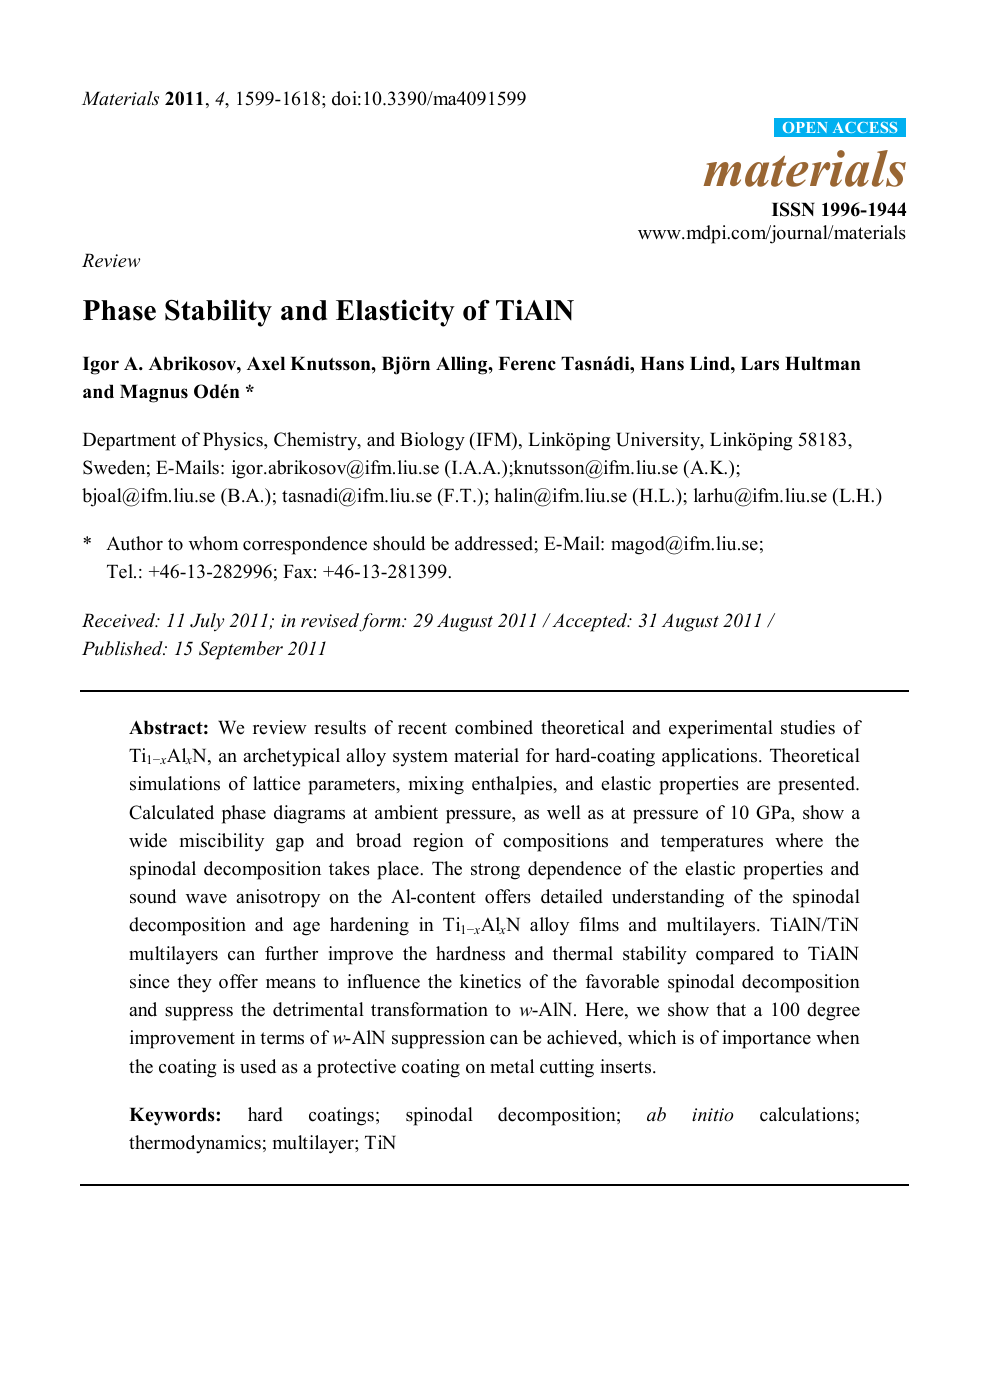 Phase Stability And Elasticity Of Tialn Topic Of Research Paper In Nano Technology Download Scholarly Article Pdf And Read For Free On Cyberleninka Open Science Hub